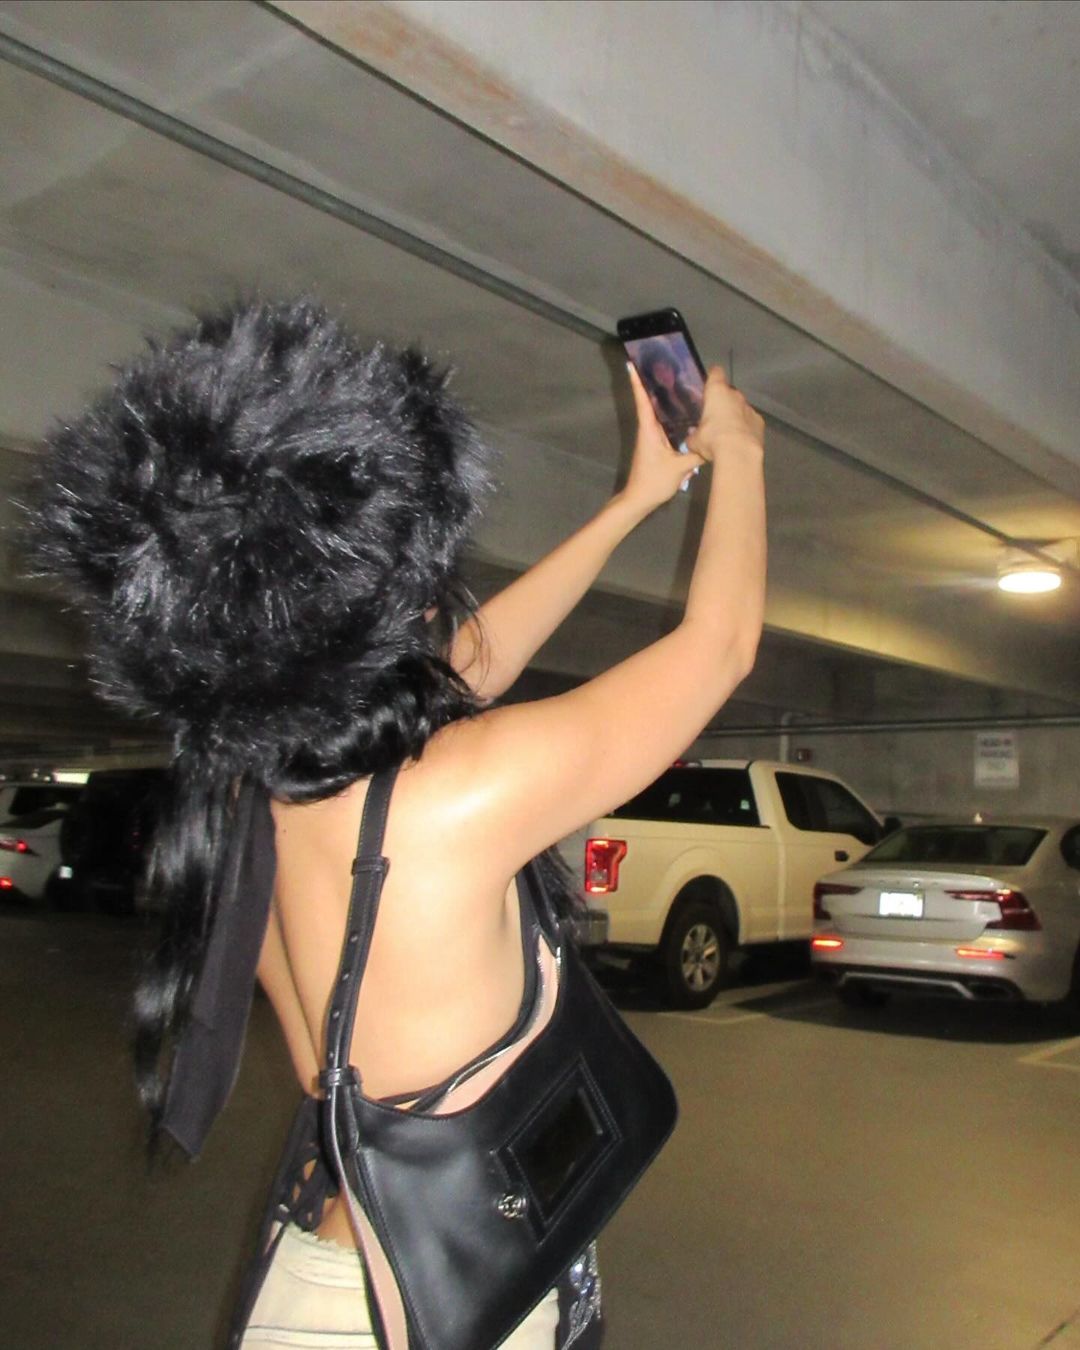 Camila Cabello Gets Cryptic in the Parking Garage! - Photo 1